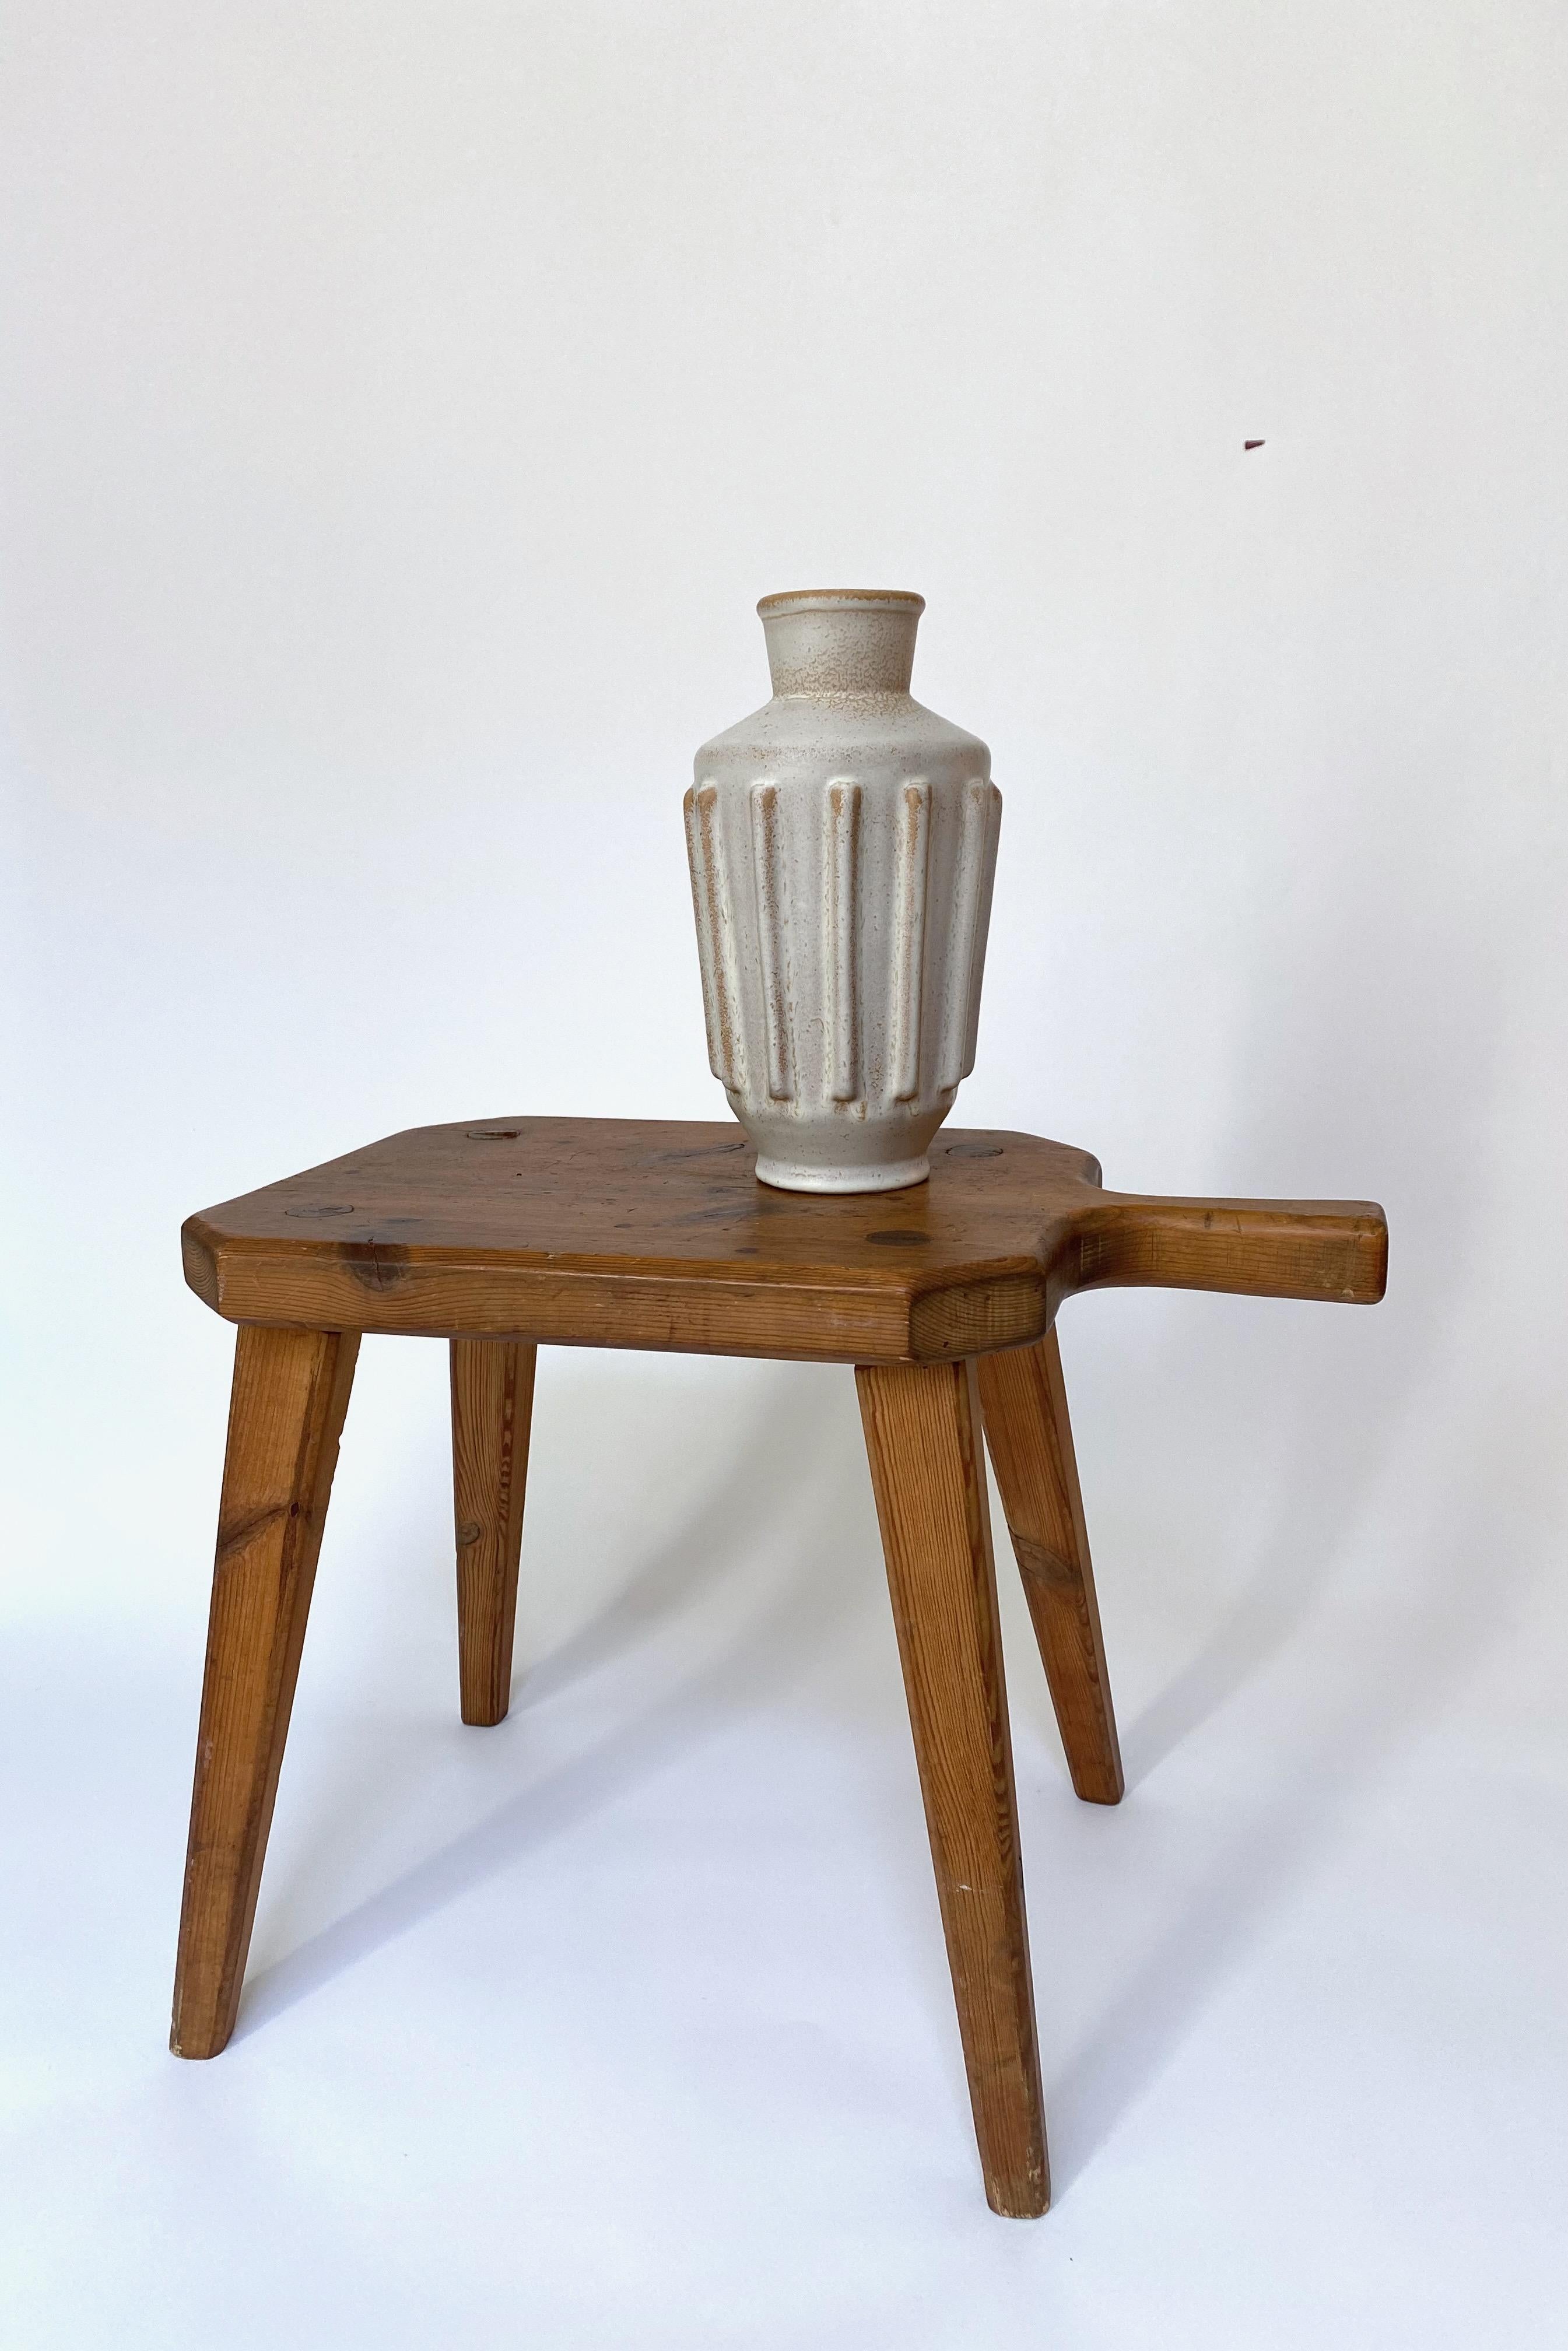 1970s, Swedish Pine Stool In Good Condition For Sale In Brooklyn, NY